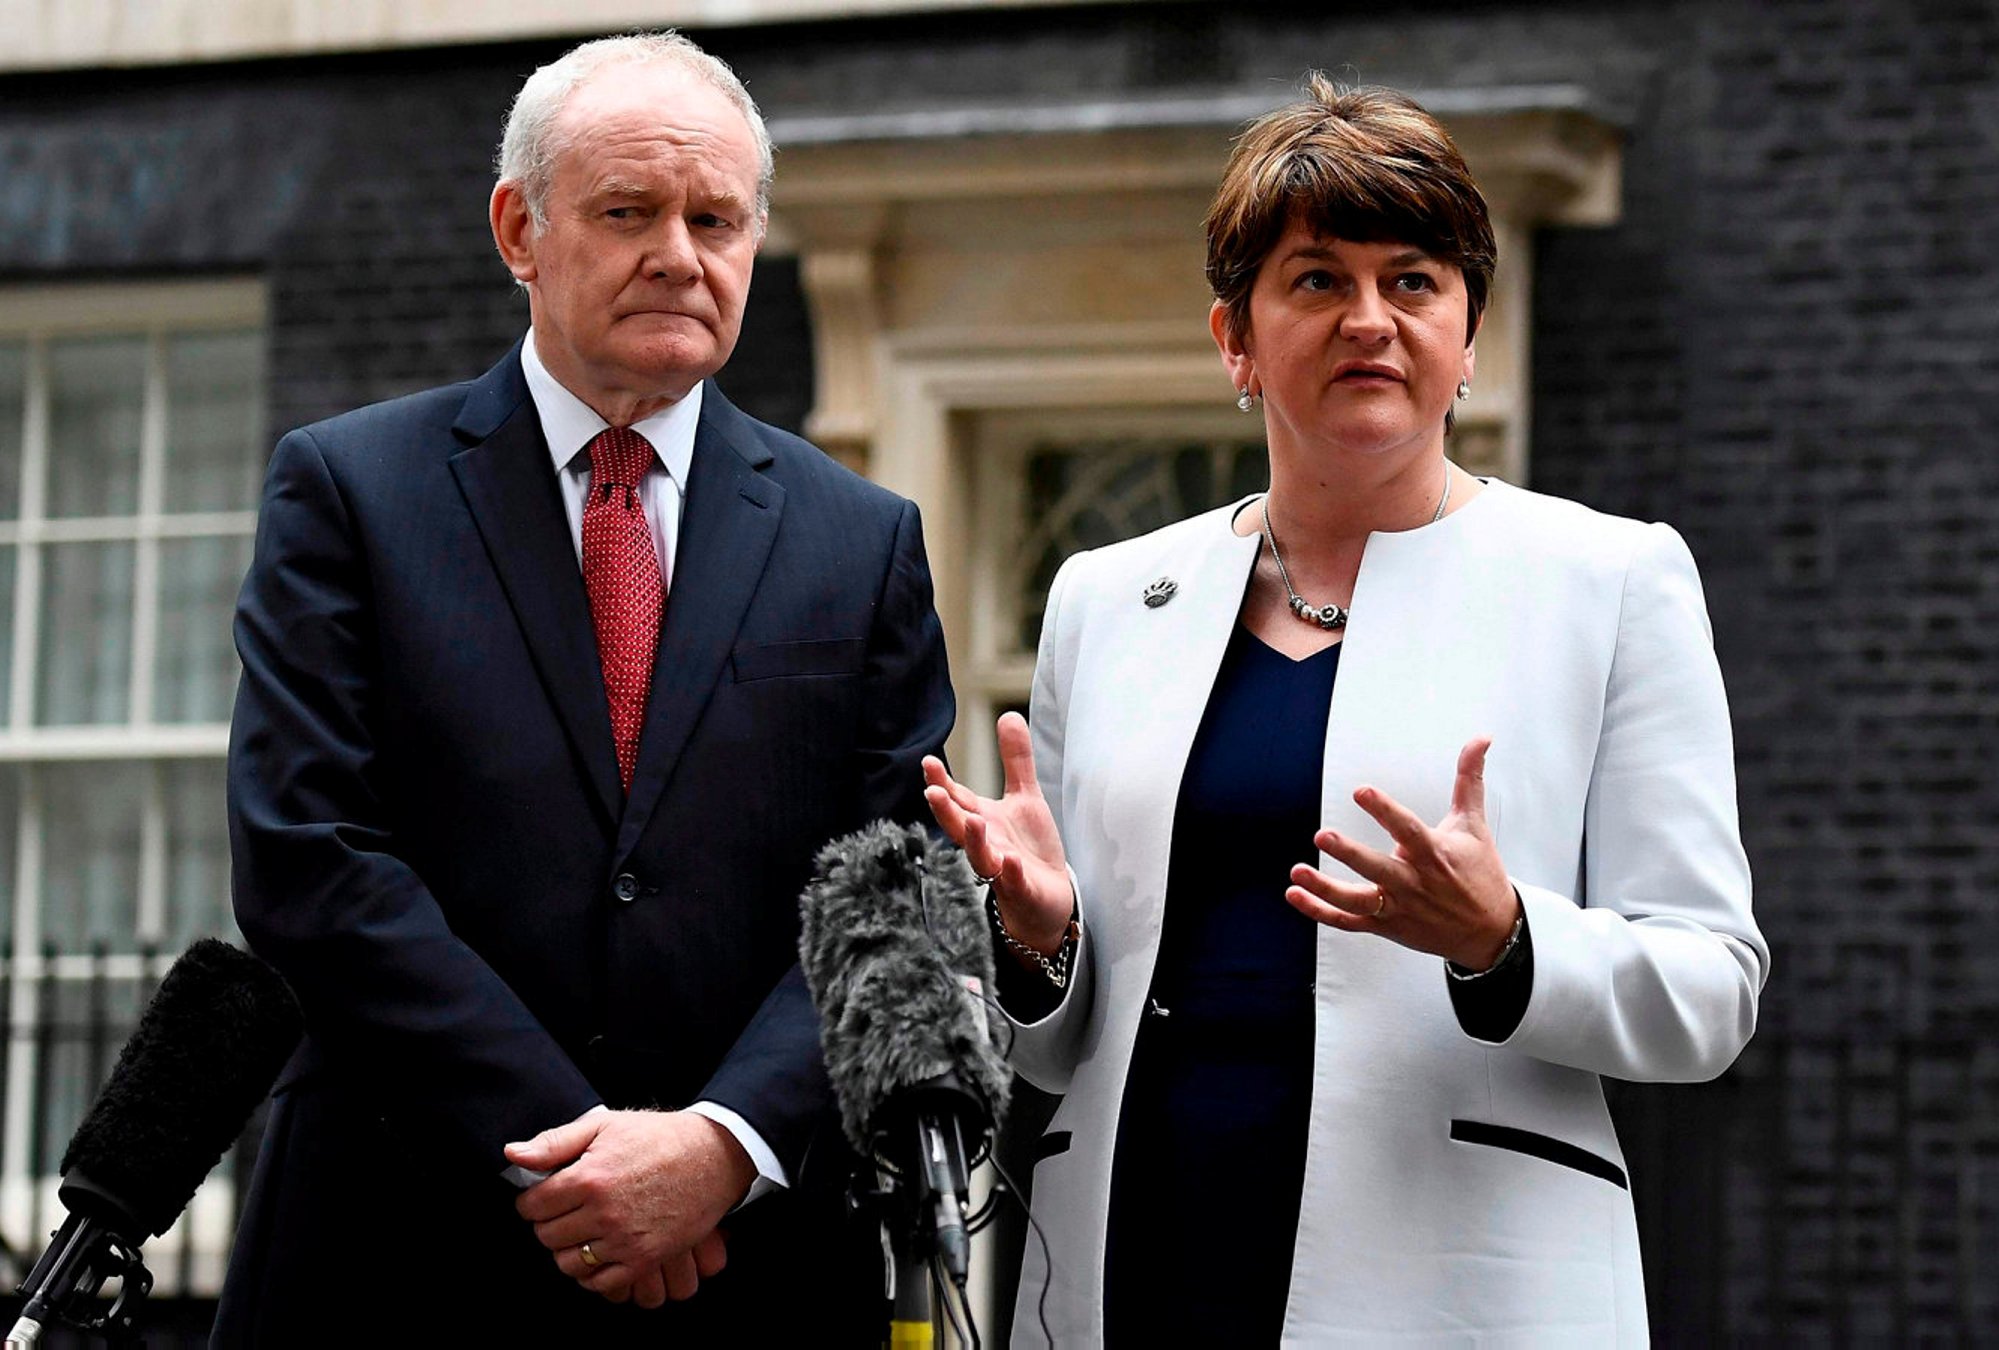 Arlene Foster (R) and Martin McGuinness, First and Deputy First Ministers of Northern Ireland, speak to journalists as they leave Number 10 Downing Street in London, Britain October 24, 2016. REUTERS/Dylan Martinez